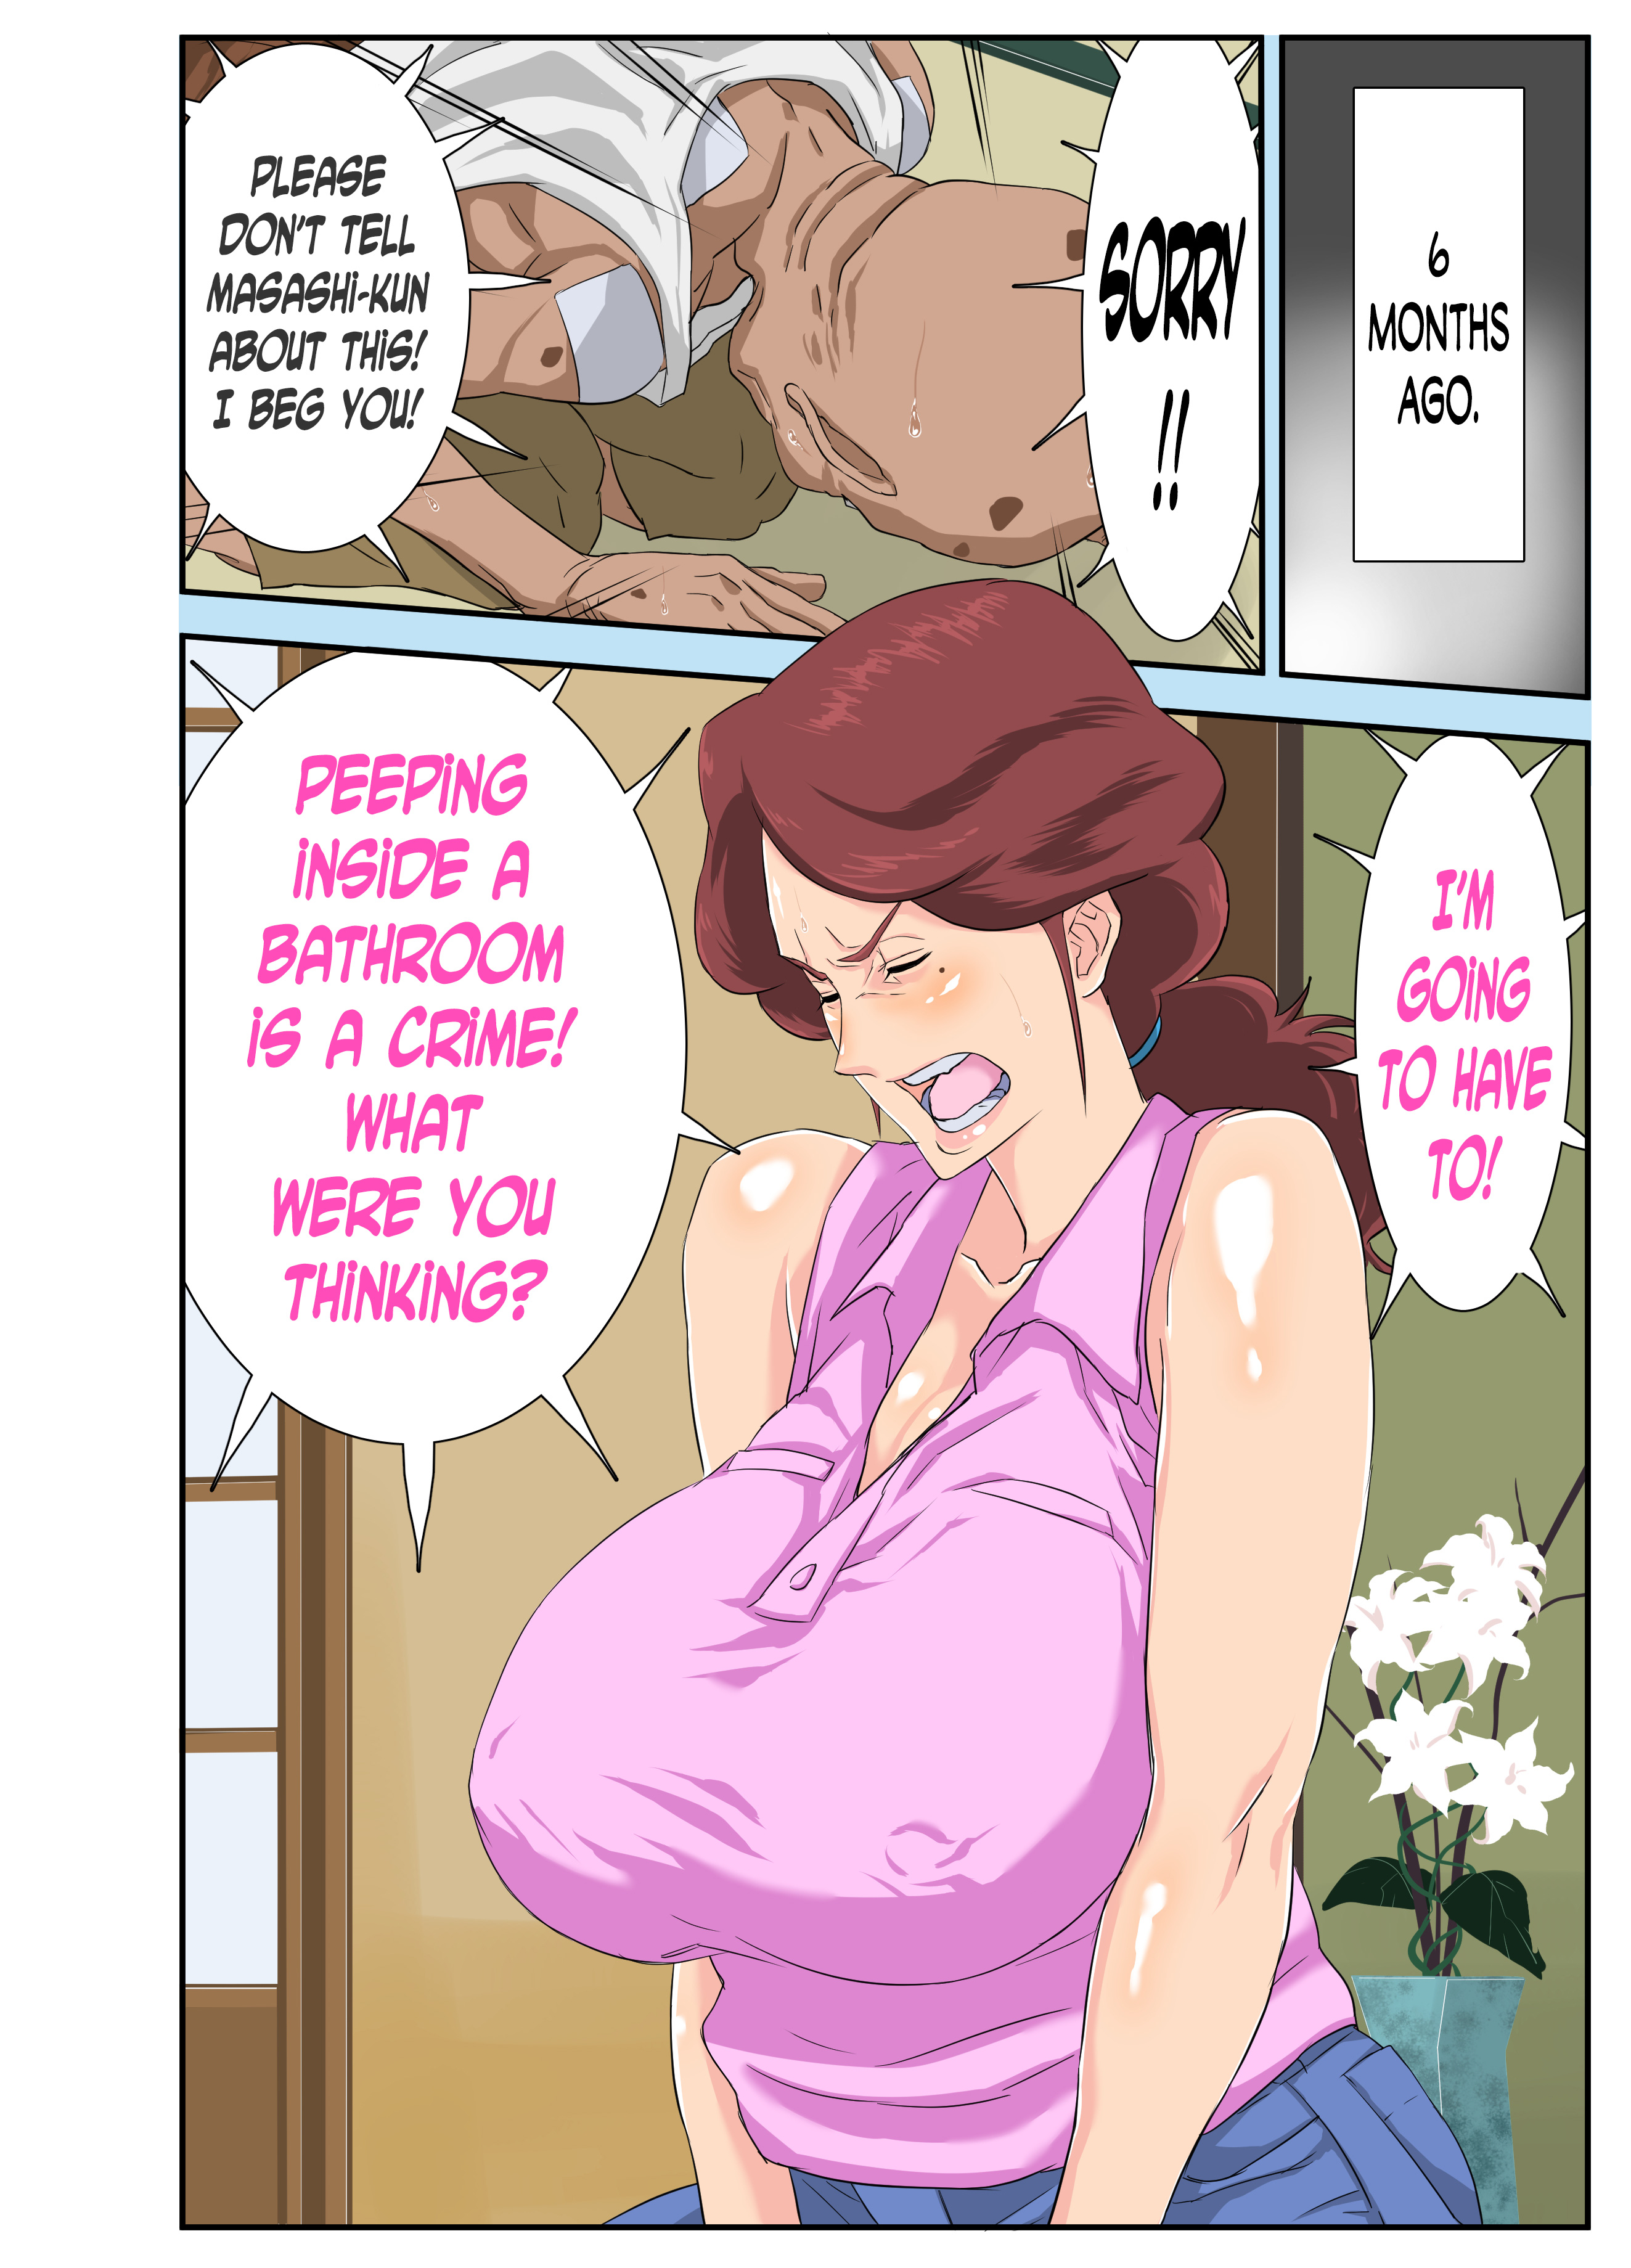 Dirty old man fucks his busty daughter while her husband sleeps - sex comics photo